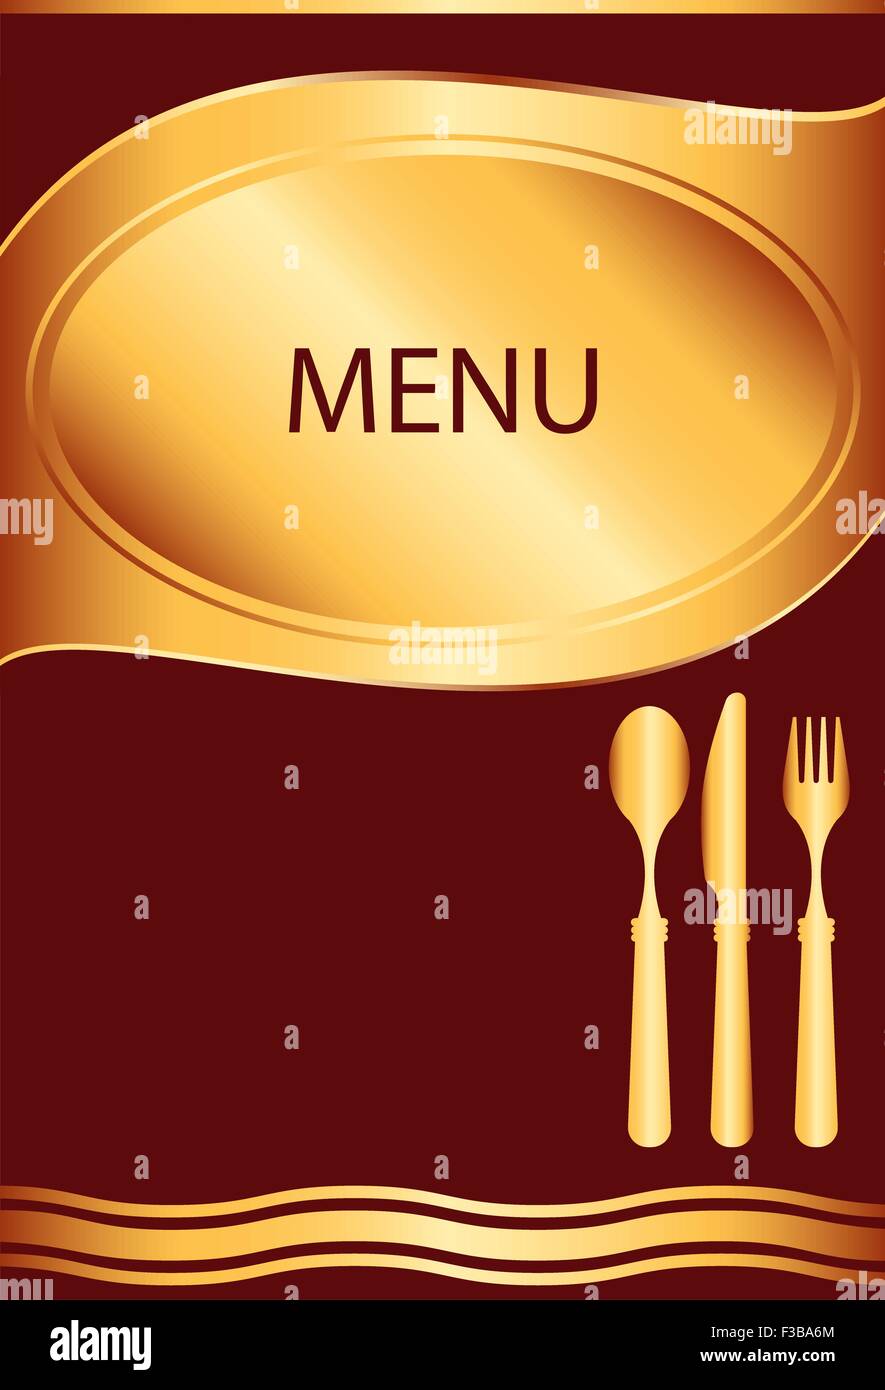 Beautiful background hotel menu card images for free download